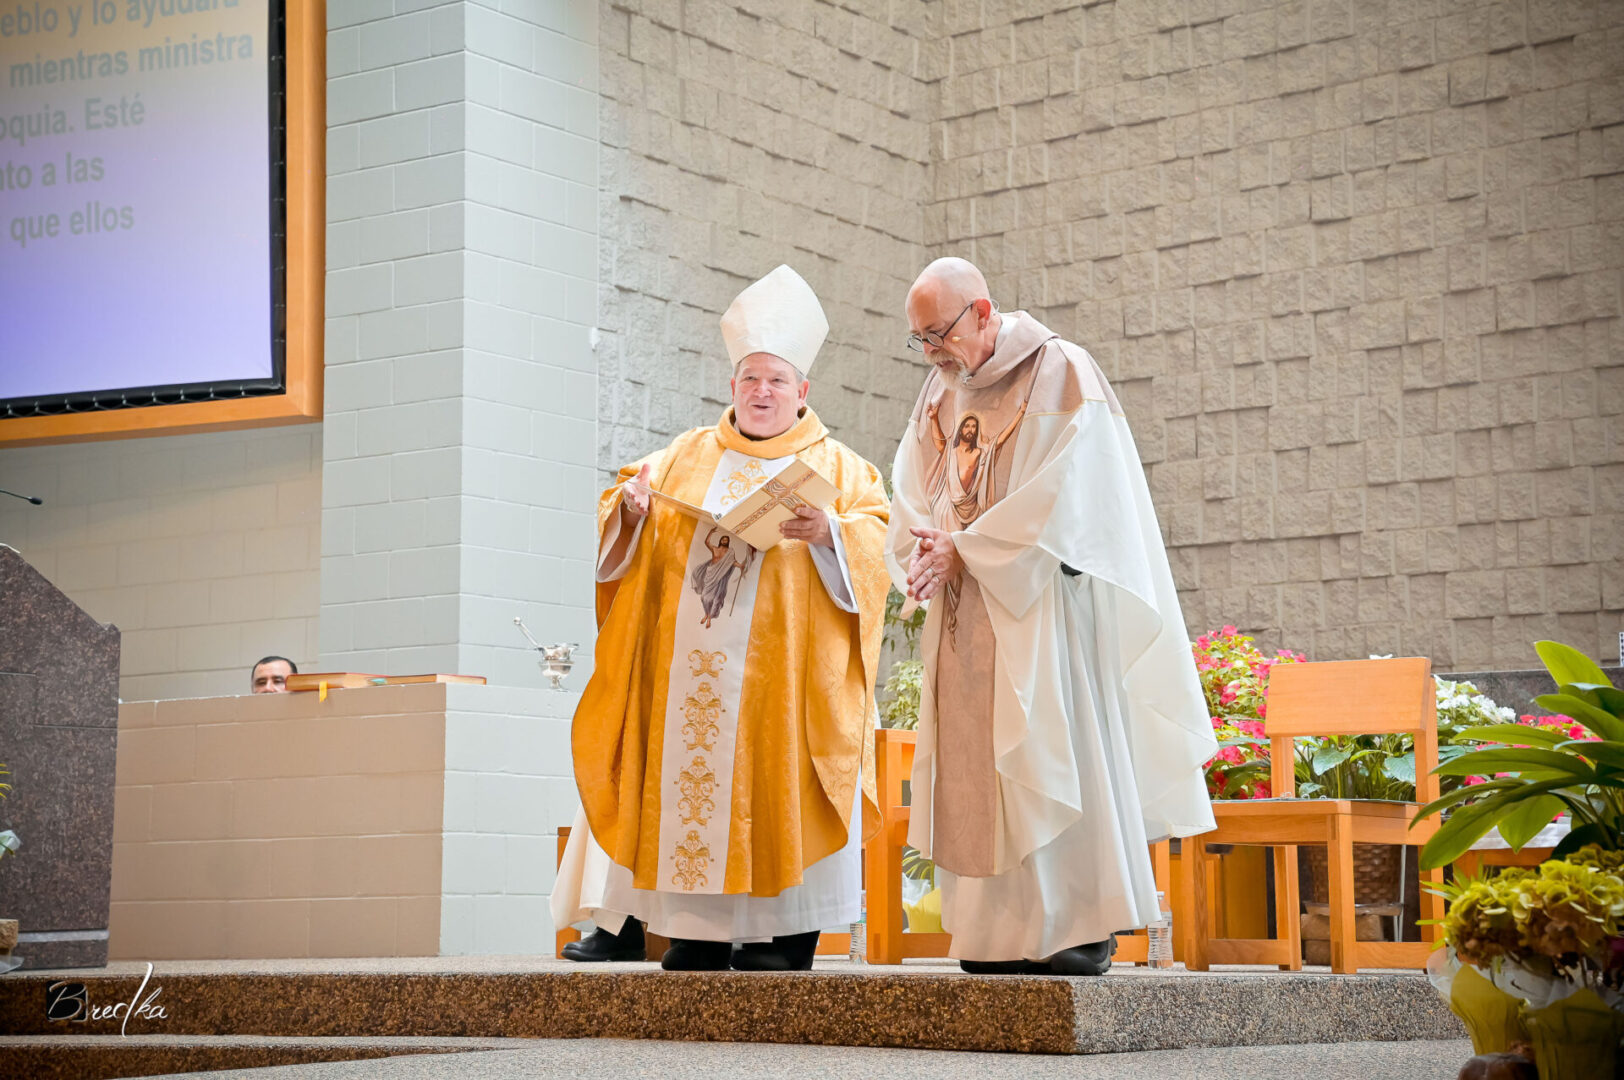 Two priests in robes during a ceremony.